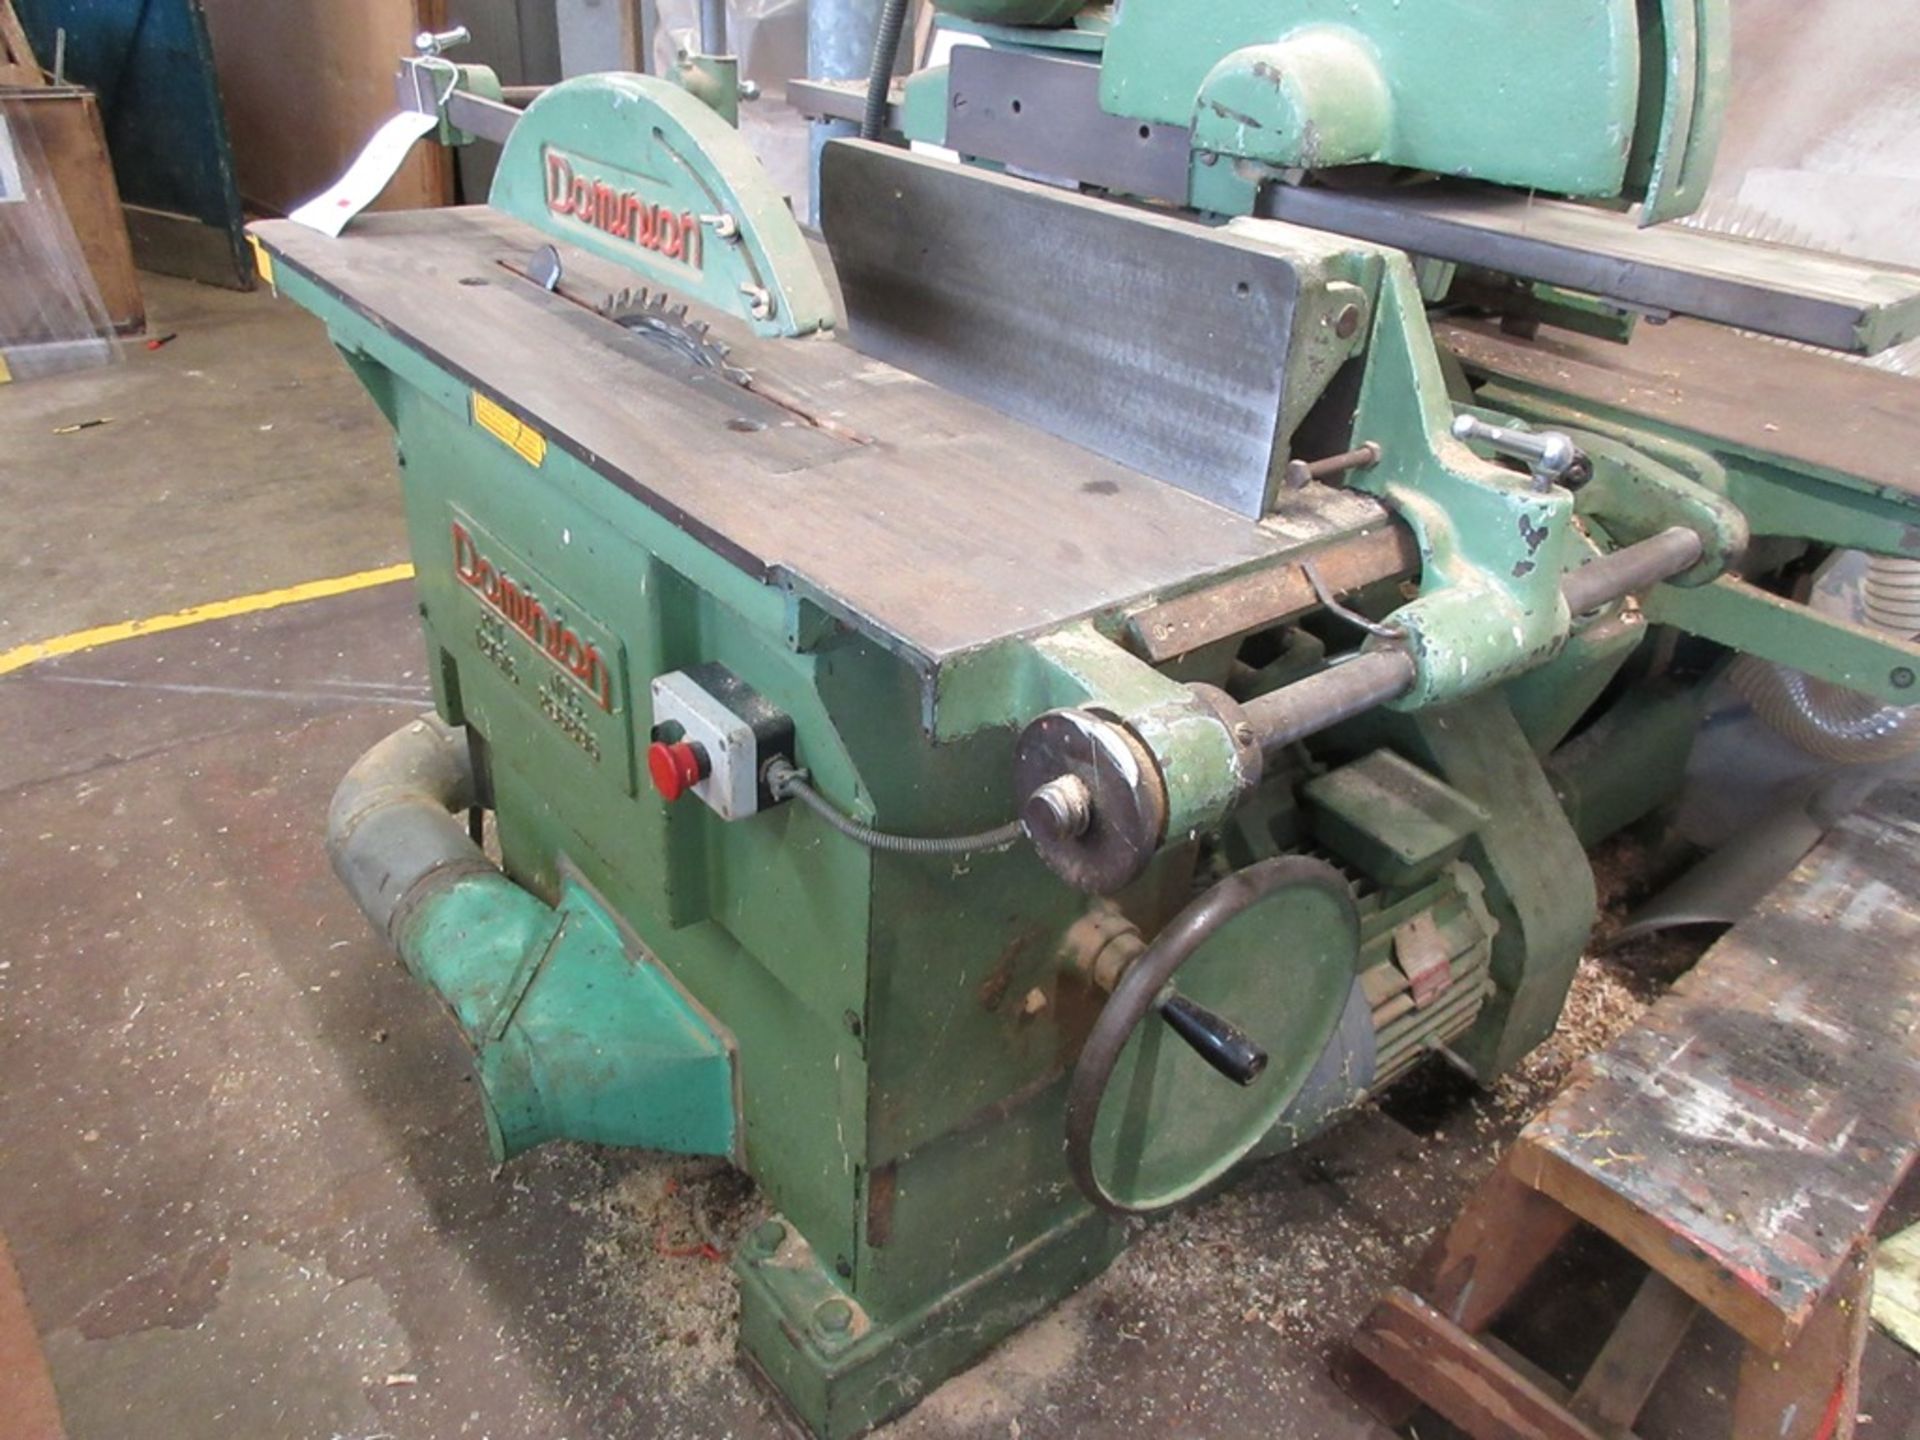 Dominion saw bench / thicknesser planer and cross cut saw, no. 266986, 1.6m x 1.6m, 3 phase, with - Image 4 of 9